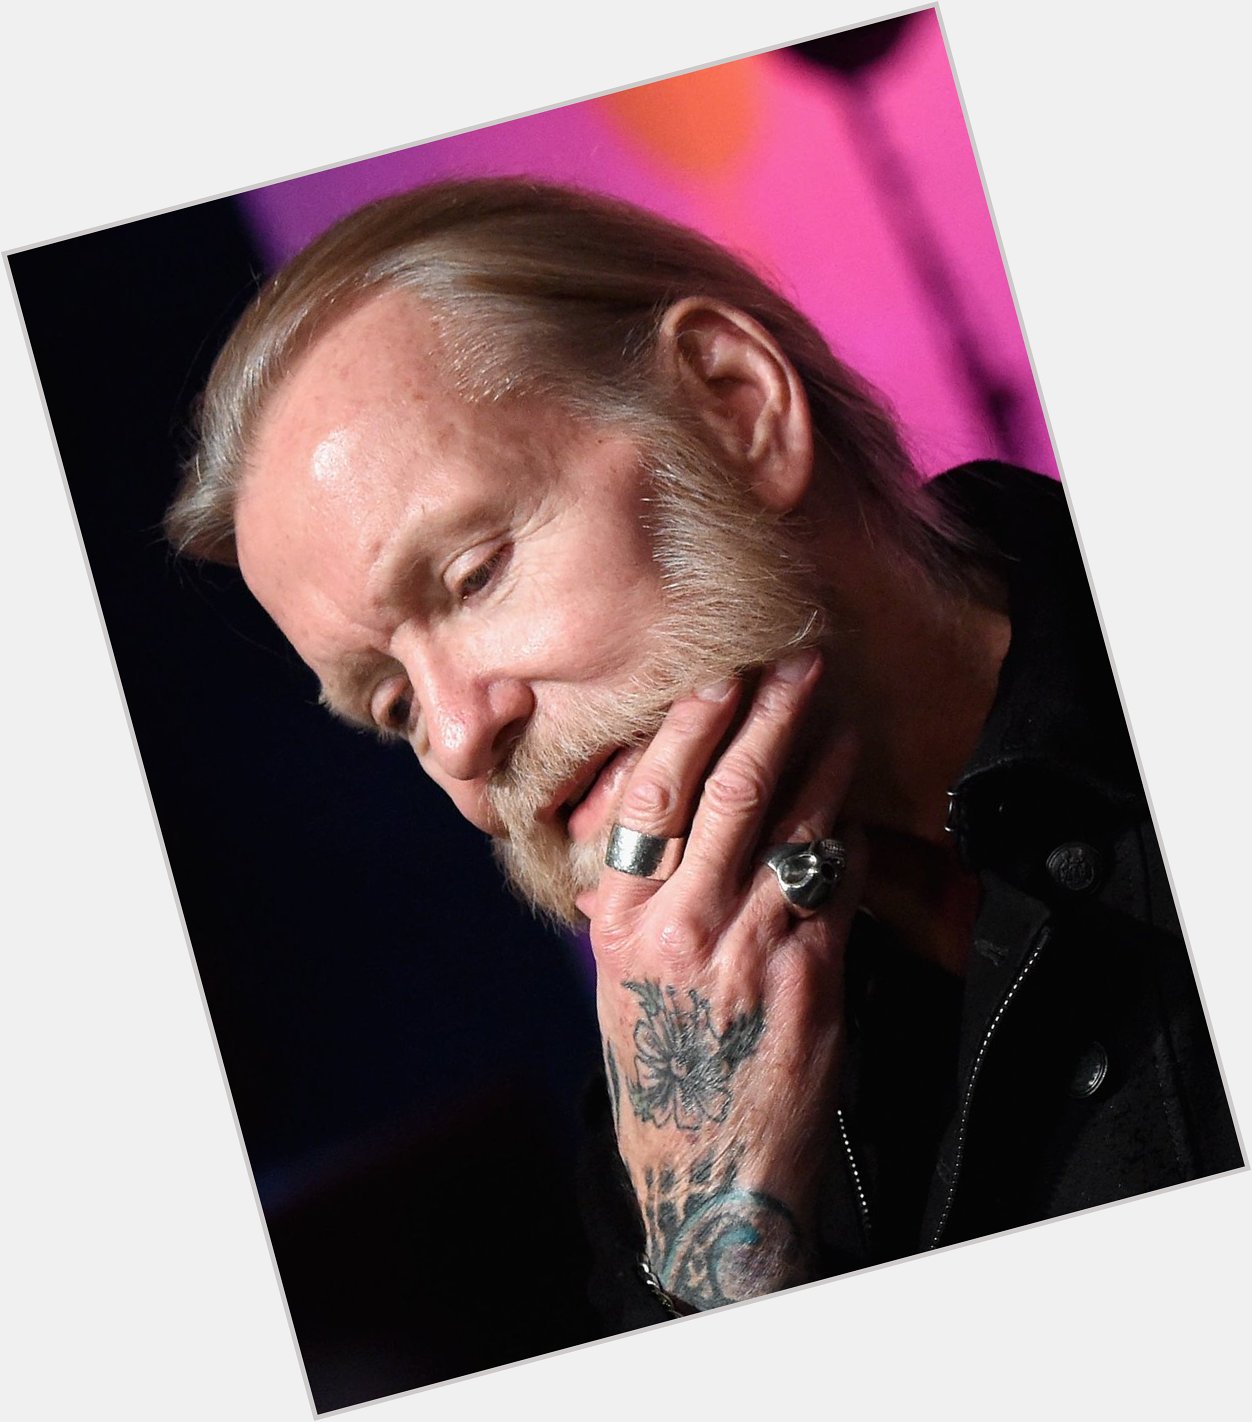 Happy Birthday to Gregg Allman!! He would have be 73, he passed away in 2017 